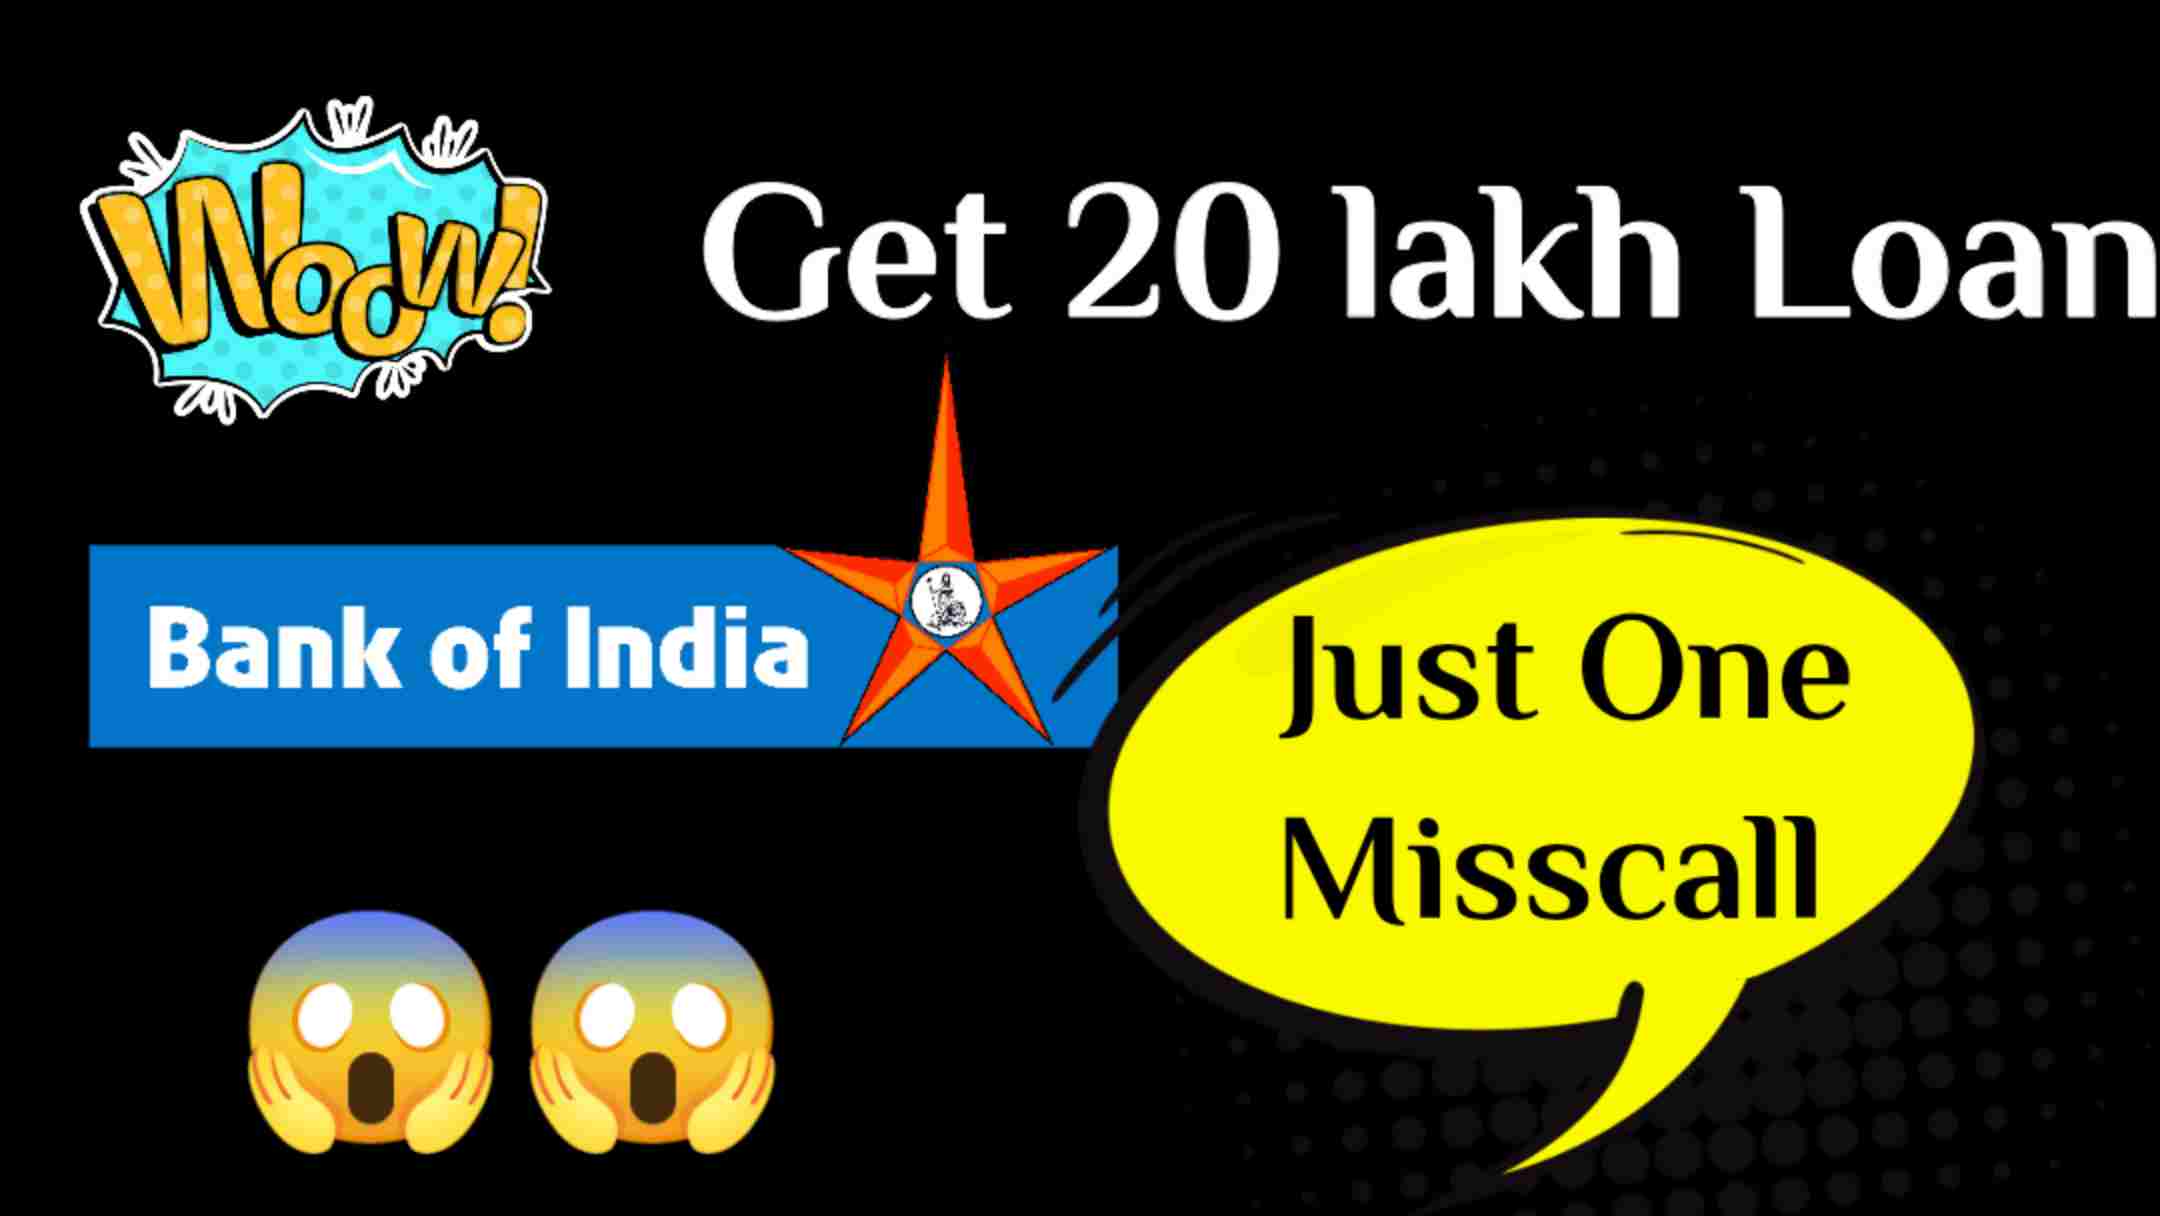 Bank of India Personal Loan ₹20 Lakh Loan with just one missed call/